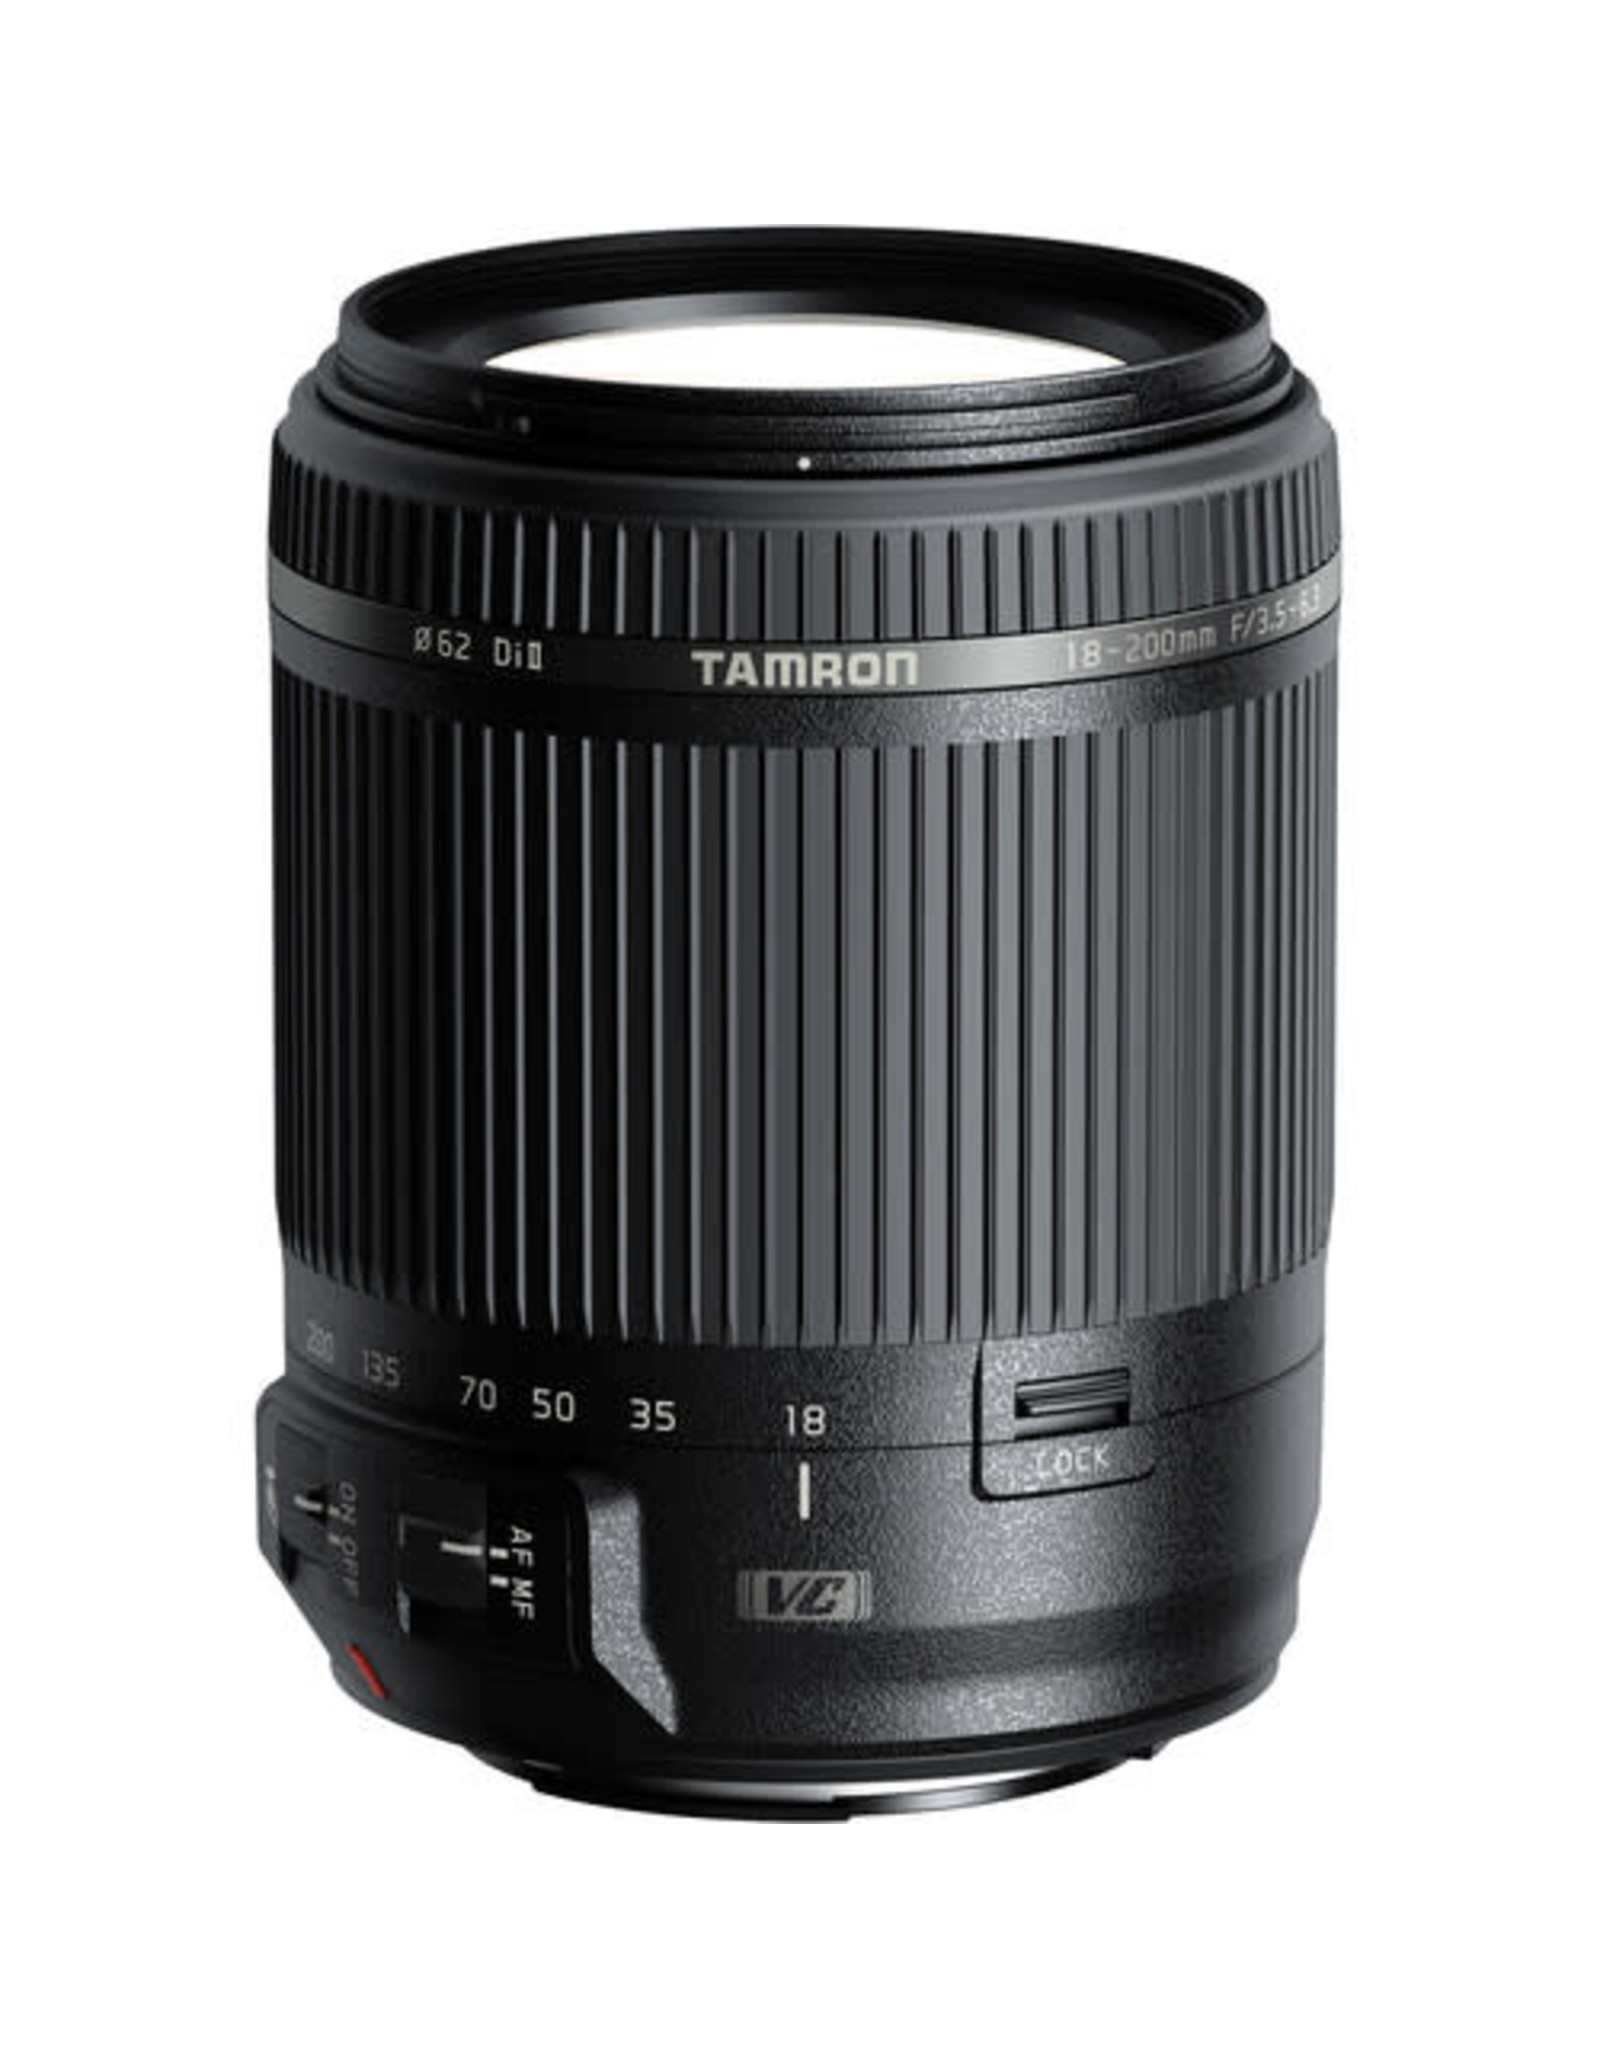 Tamron Tamron 18-200mm f/3.5-6.3 Di-II VC (Specify Mount) (LIMITED QUANTITIES)